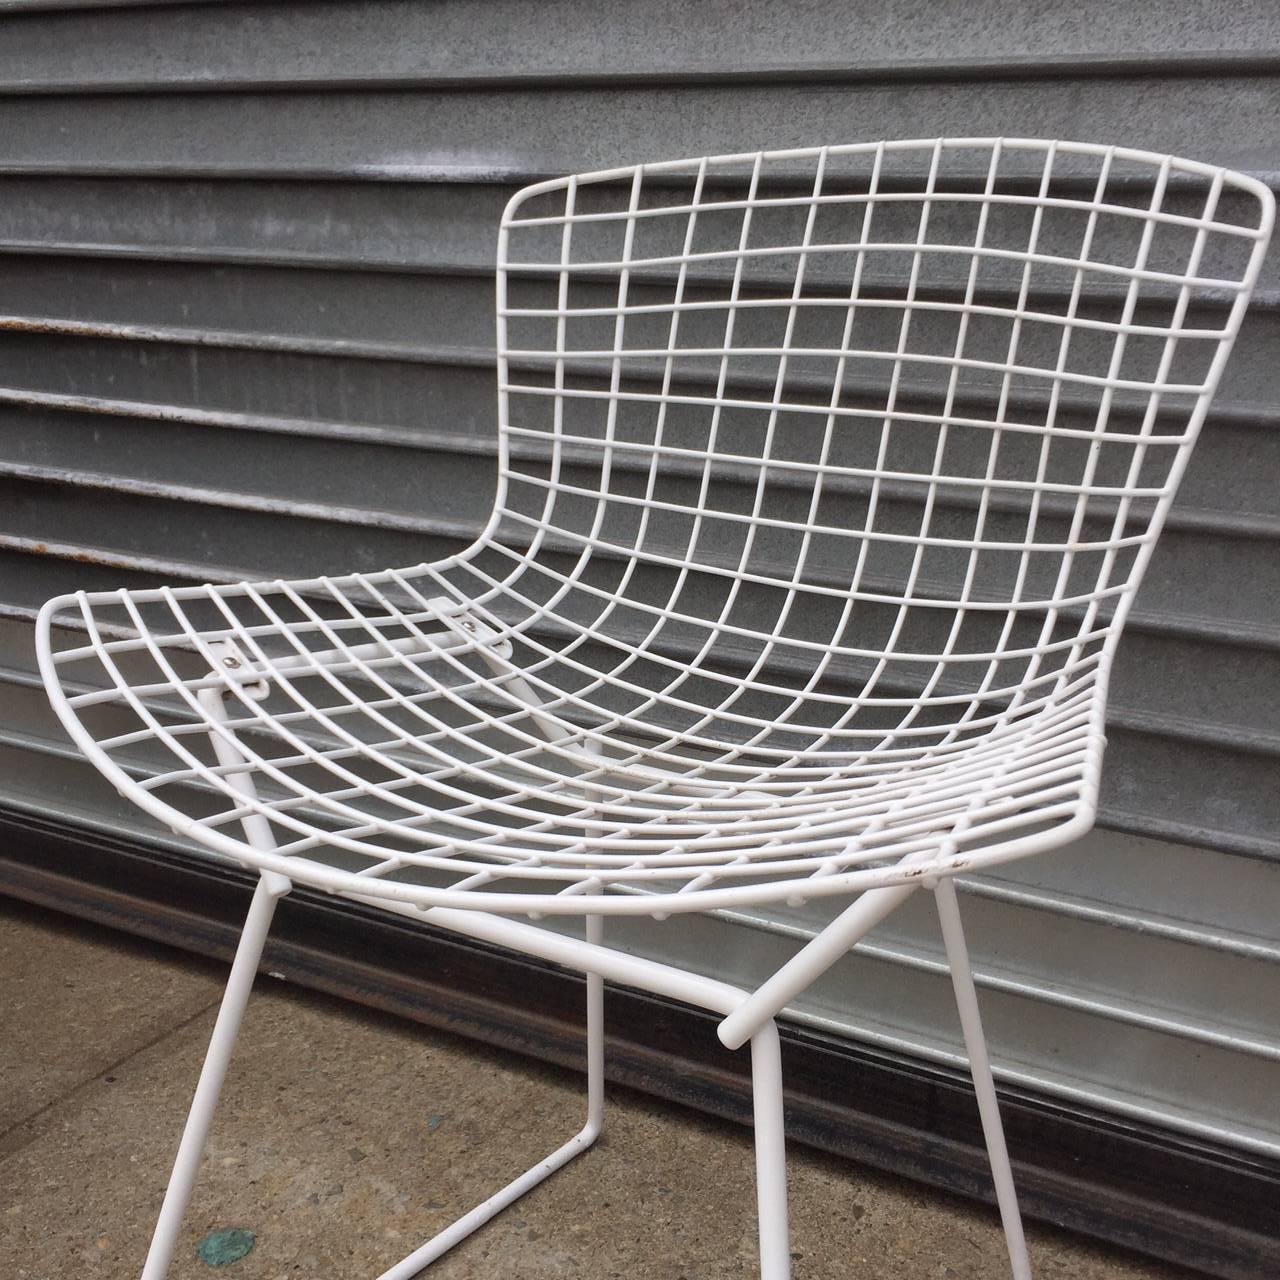 For your consideration are Harry Bertoia for Knoll vintage side chairs. These authentic examples are icons of Mid-Century modern design. Their timeless form makes these versatile chairs, they can be used as accent chairs, dining chairs, lobby chairs